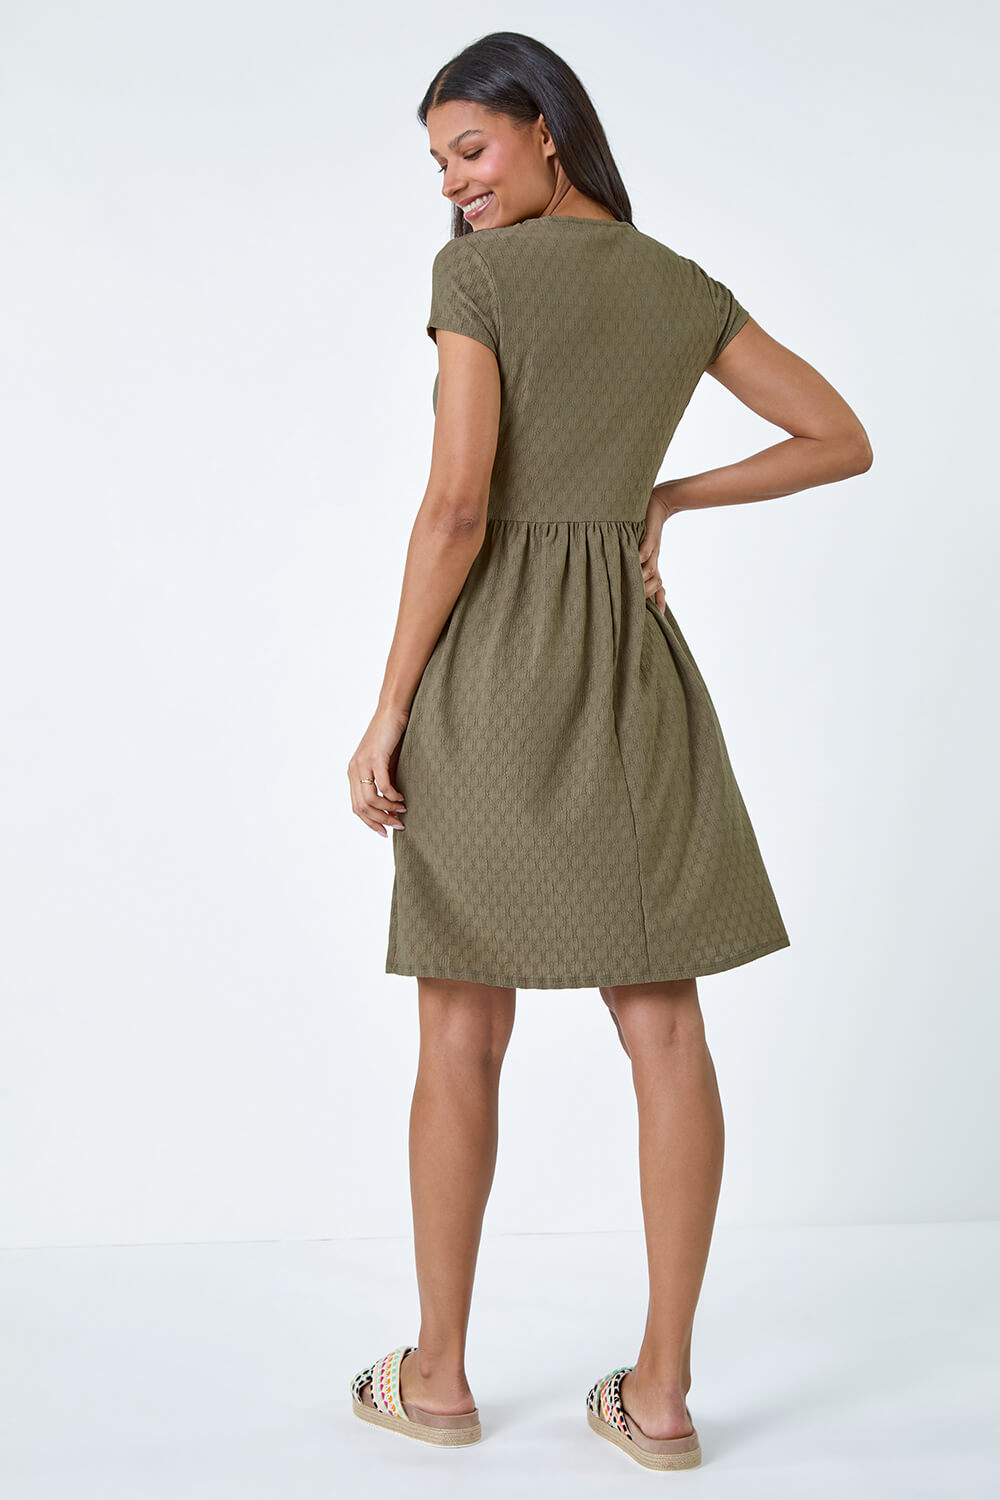 KHAKI Textured Ruched Stretch Jersey Dress, Image 3 of 5